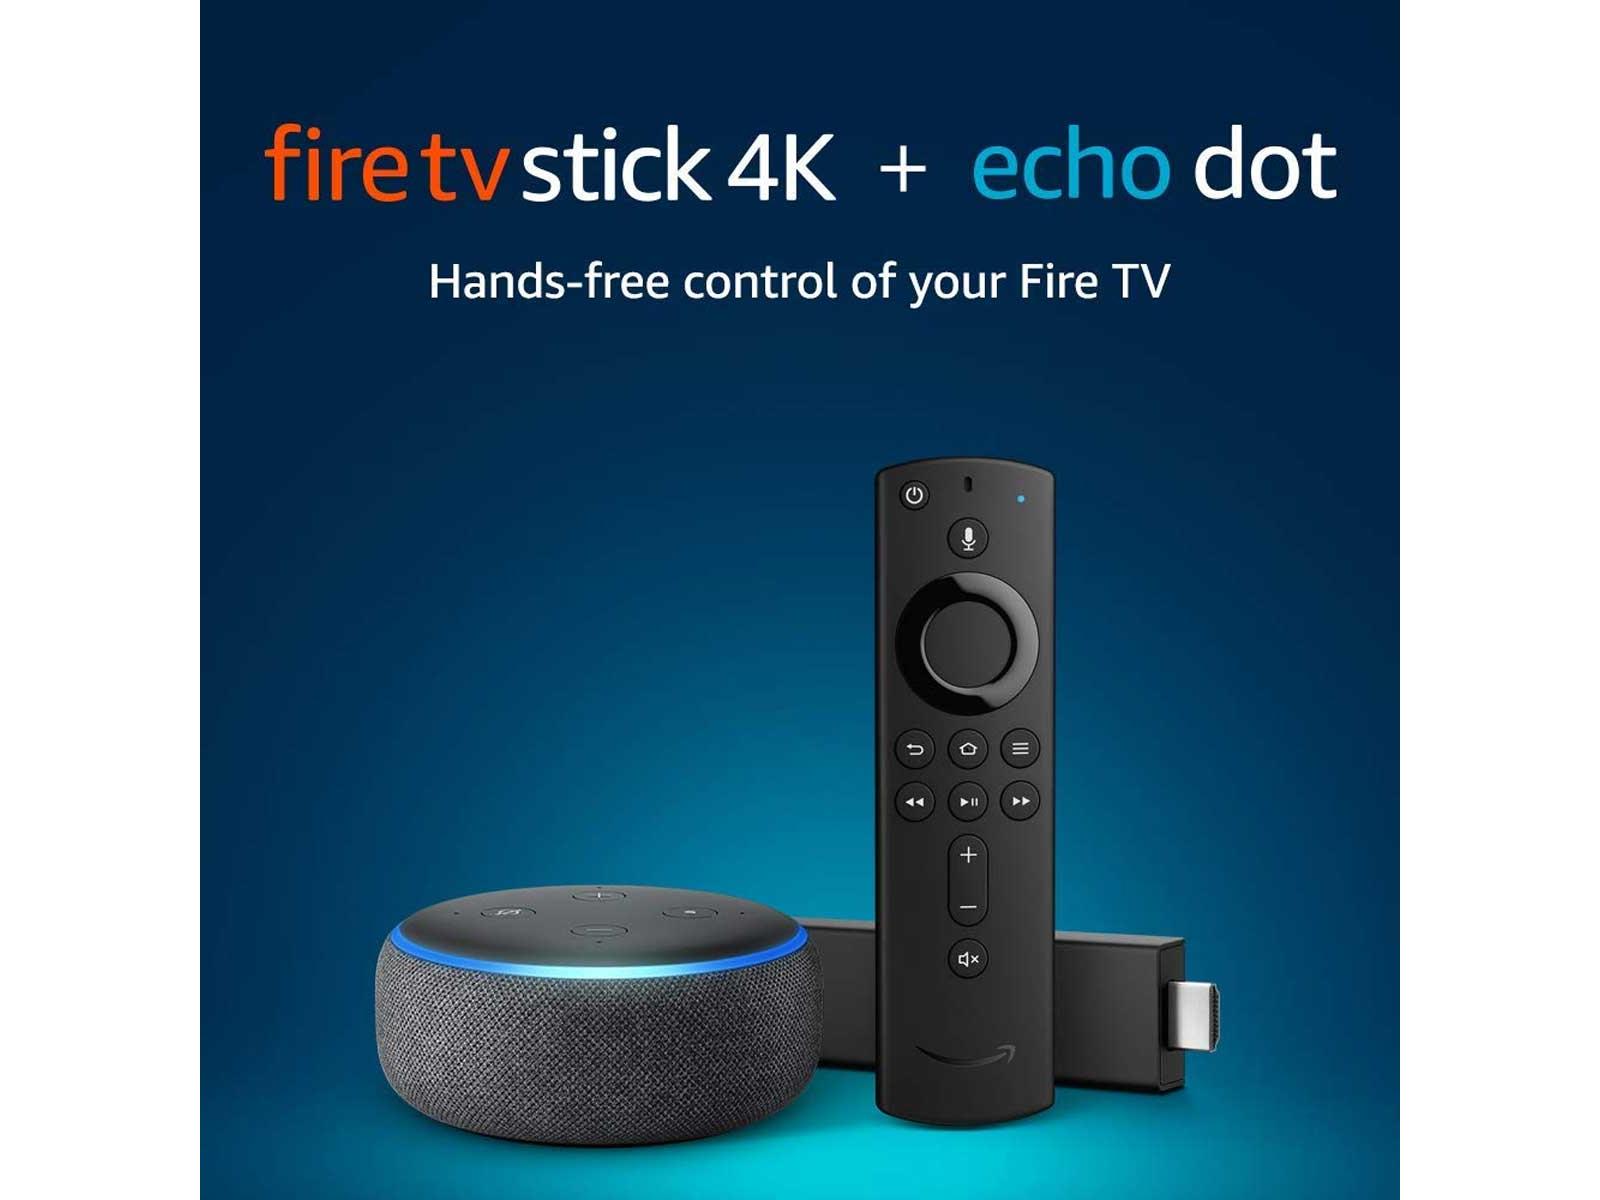 Amazon Fire TV Stick 4K, Echo Dot Bundle Is Over Half Off With